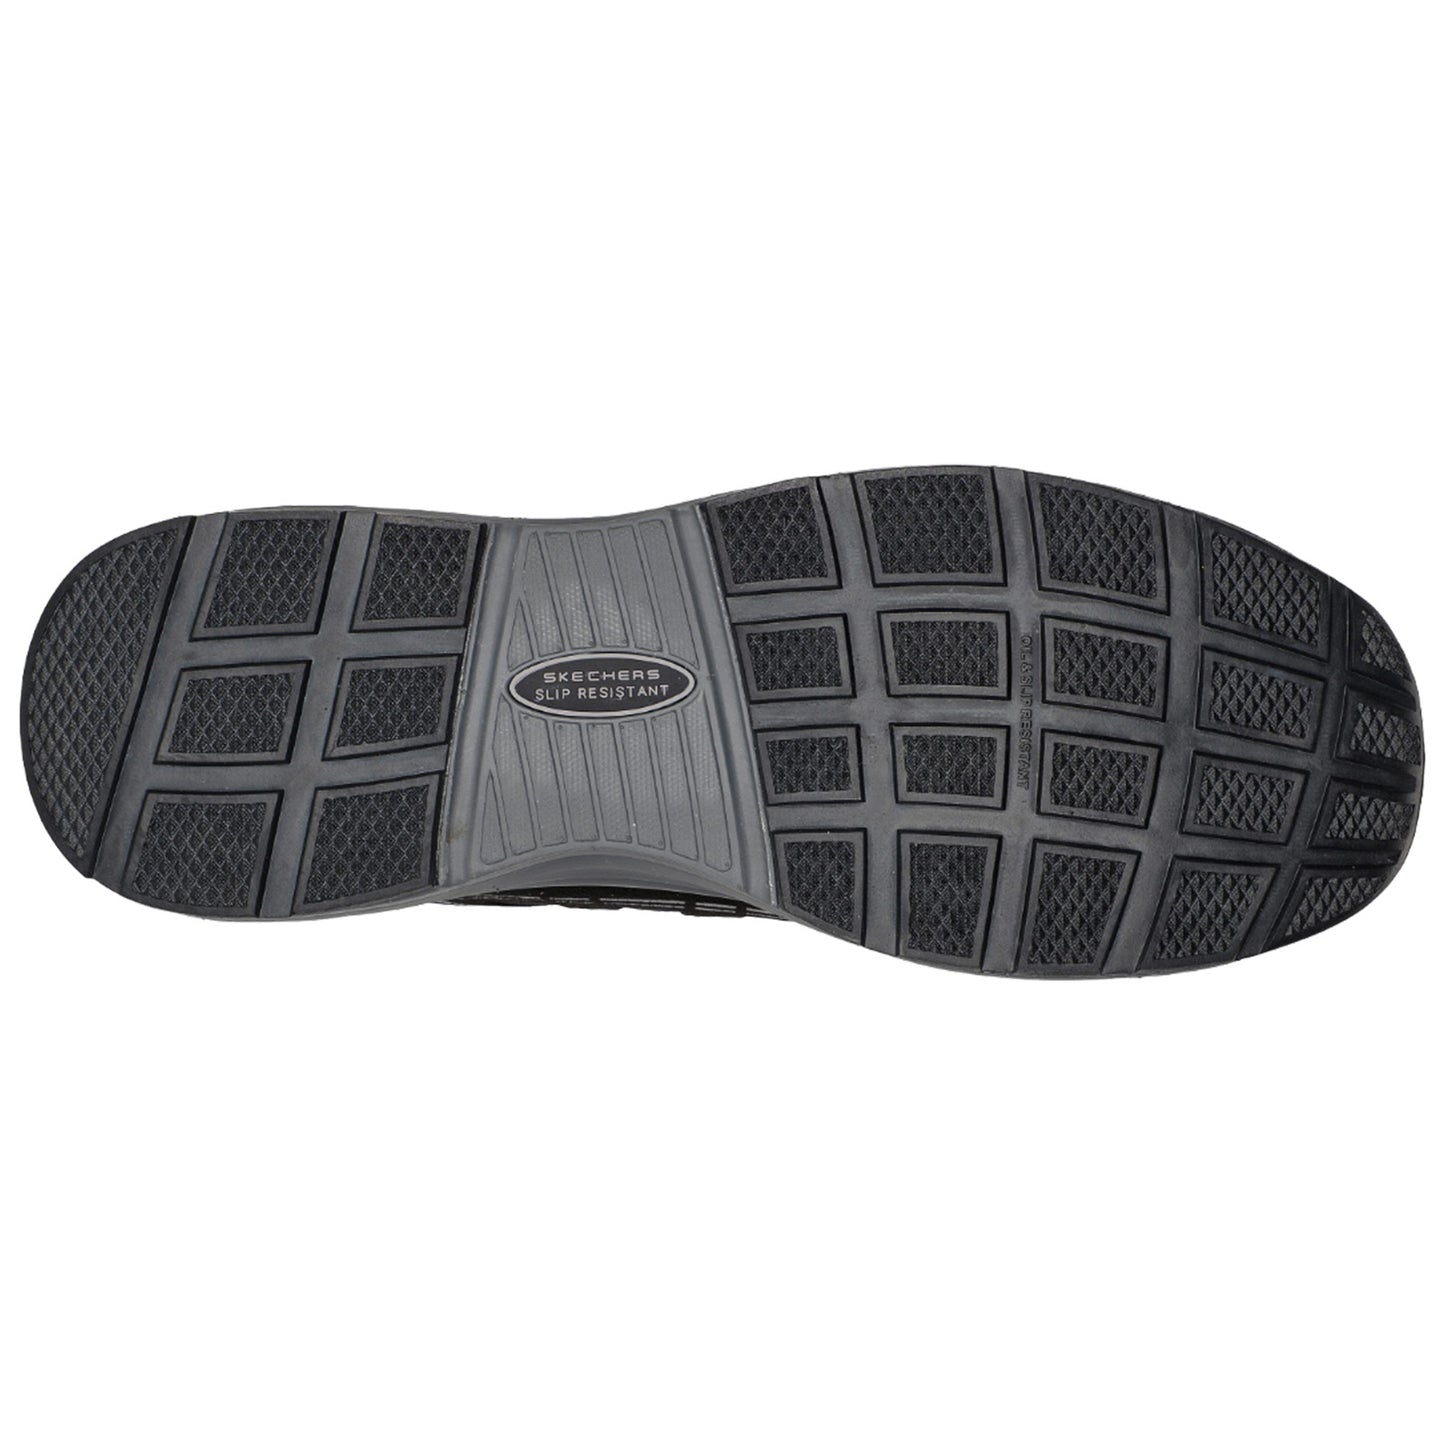 Skechers Mens Malad II Composite Toe Safety Trainers